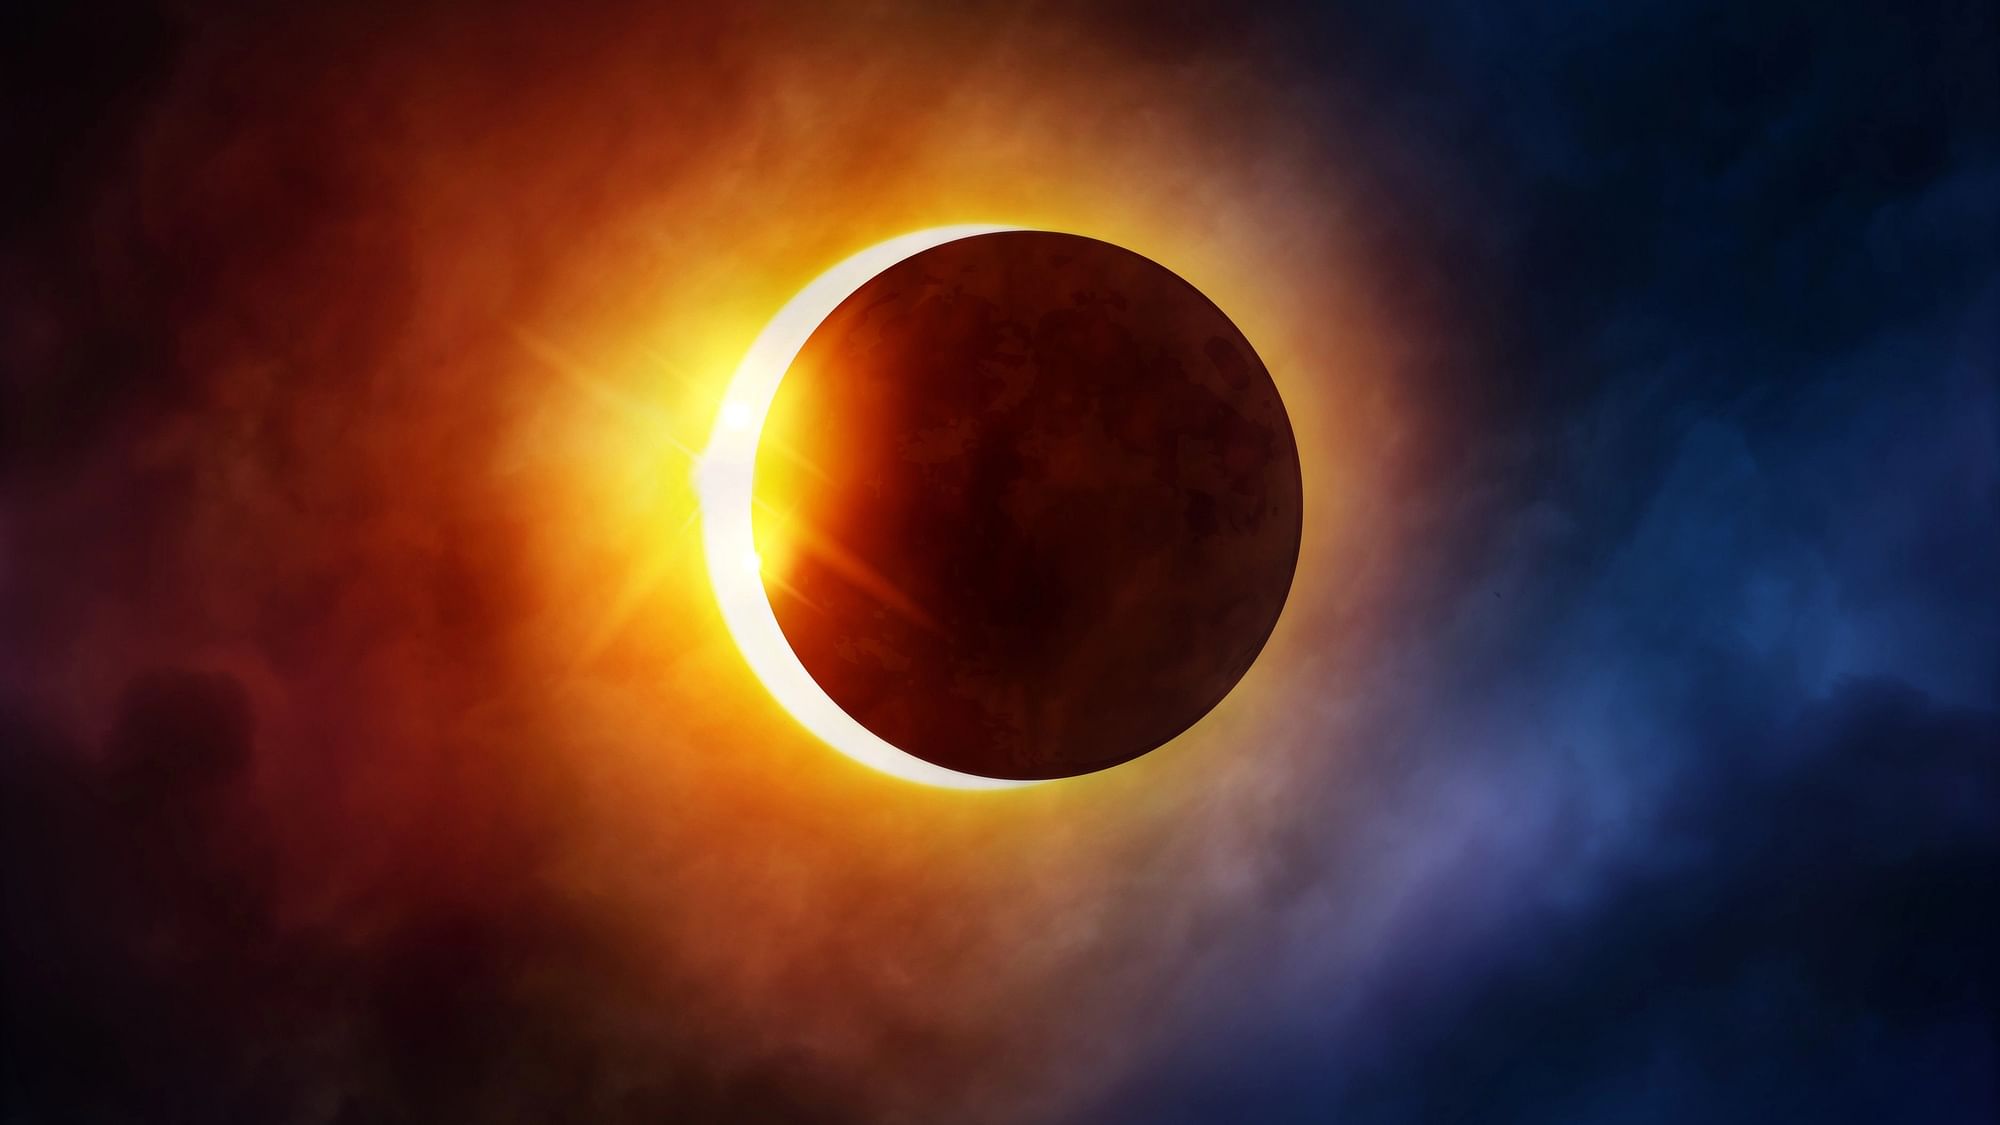 Here's everything you need to know ahead of the 'ring of fire' solar eclipse